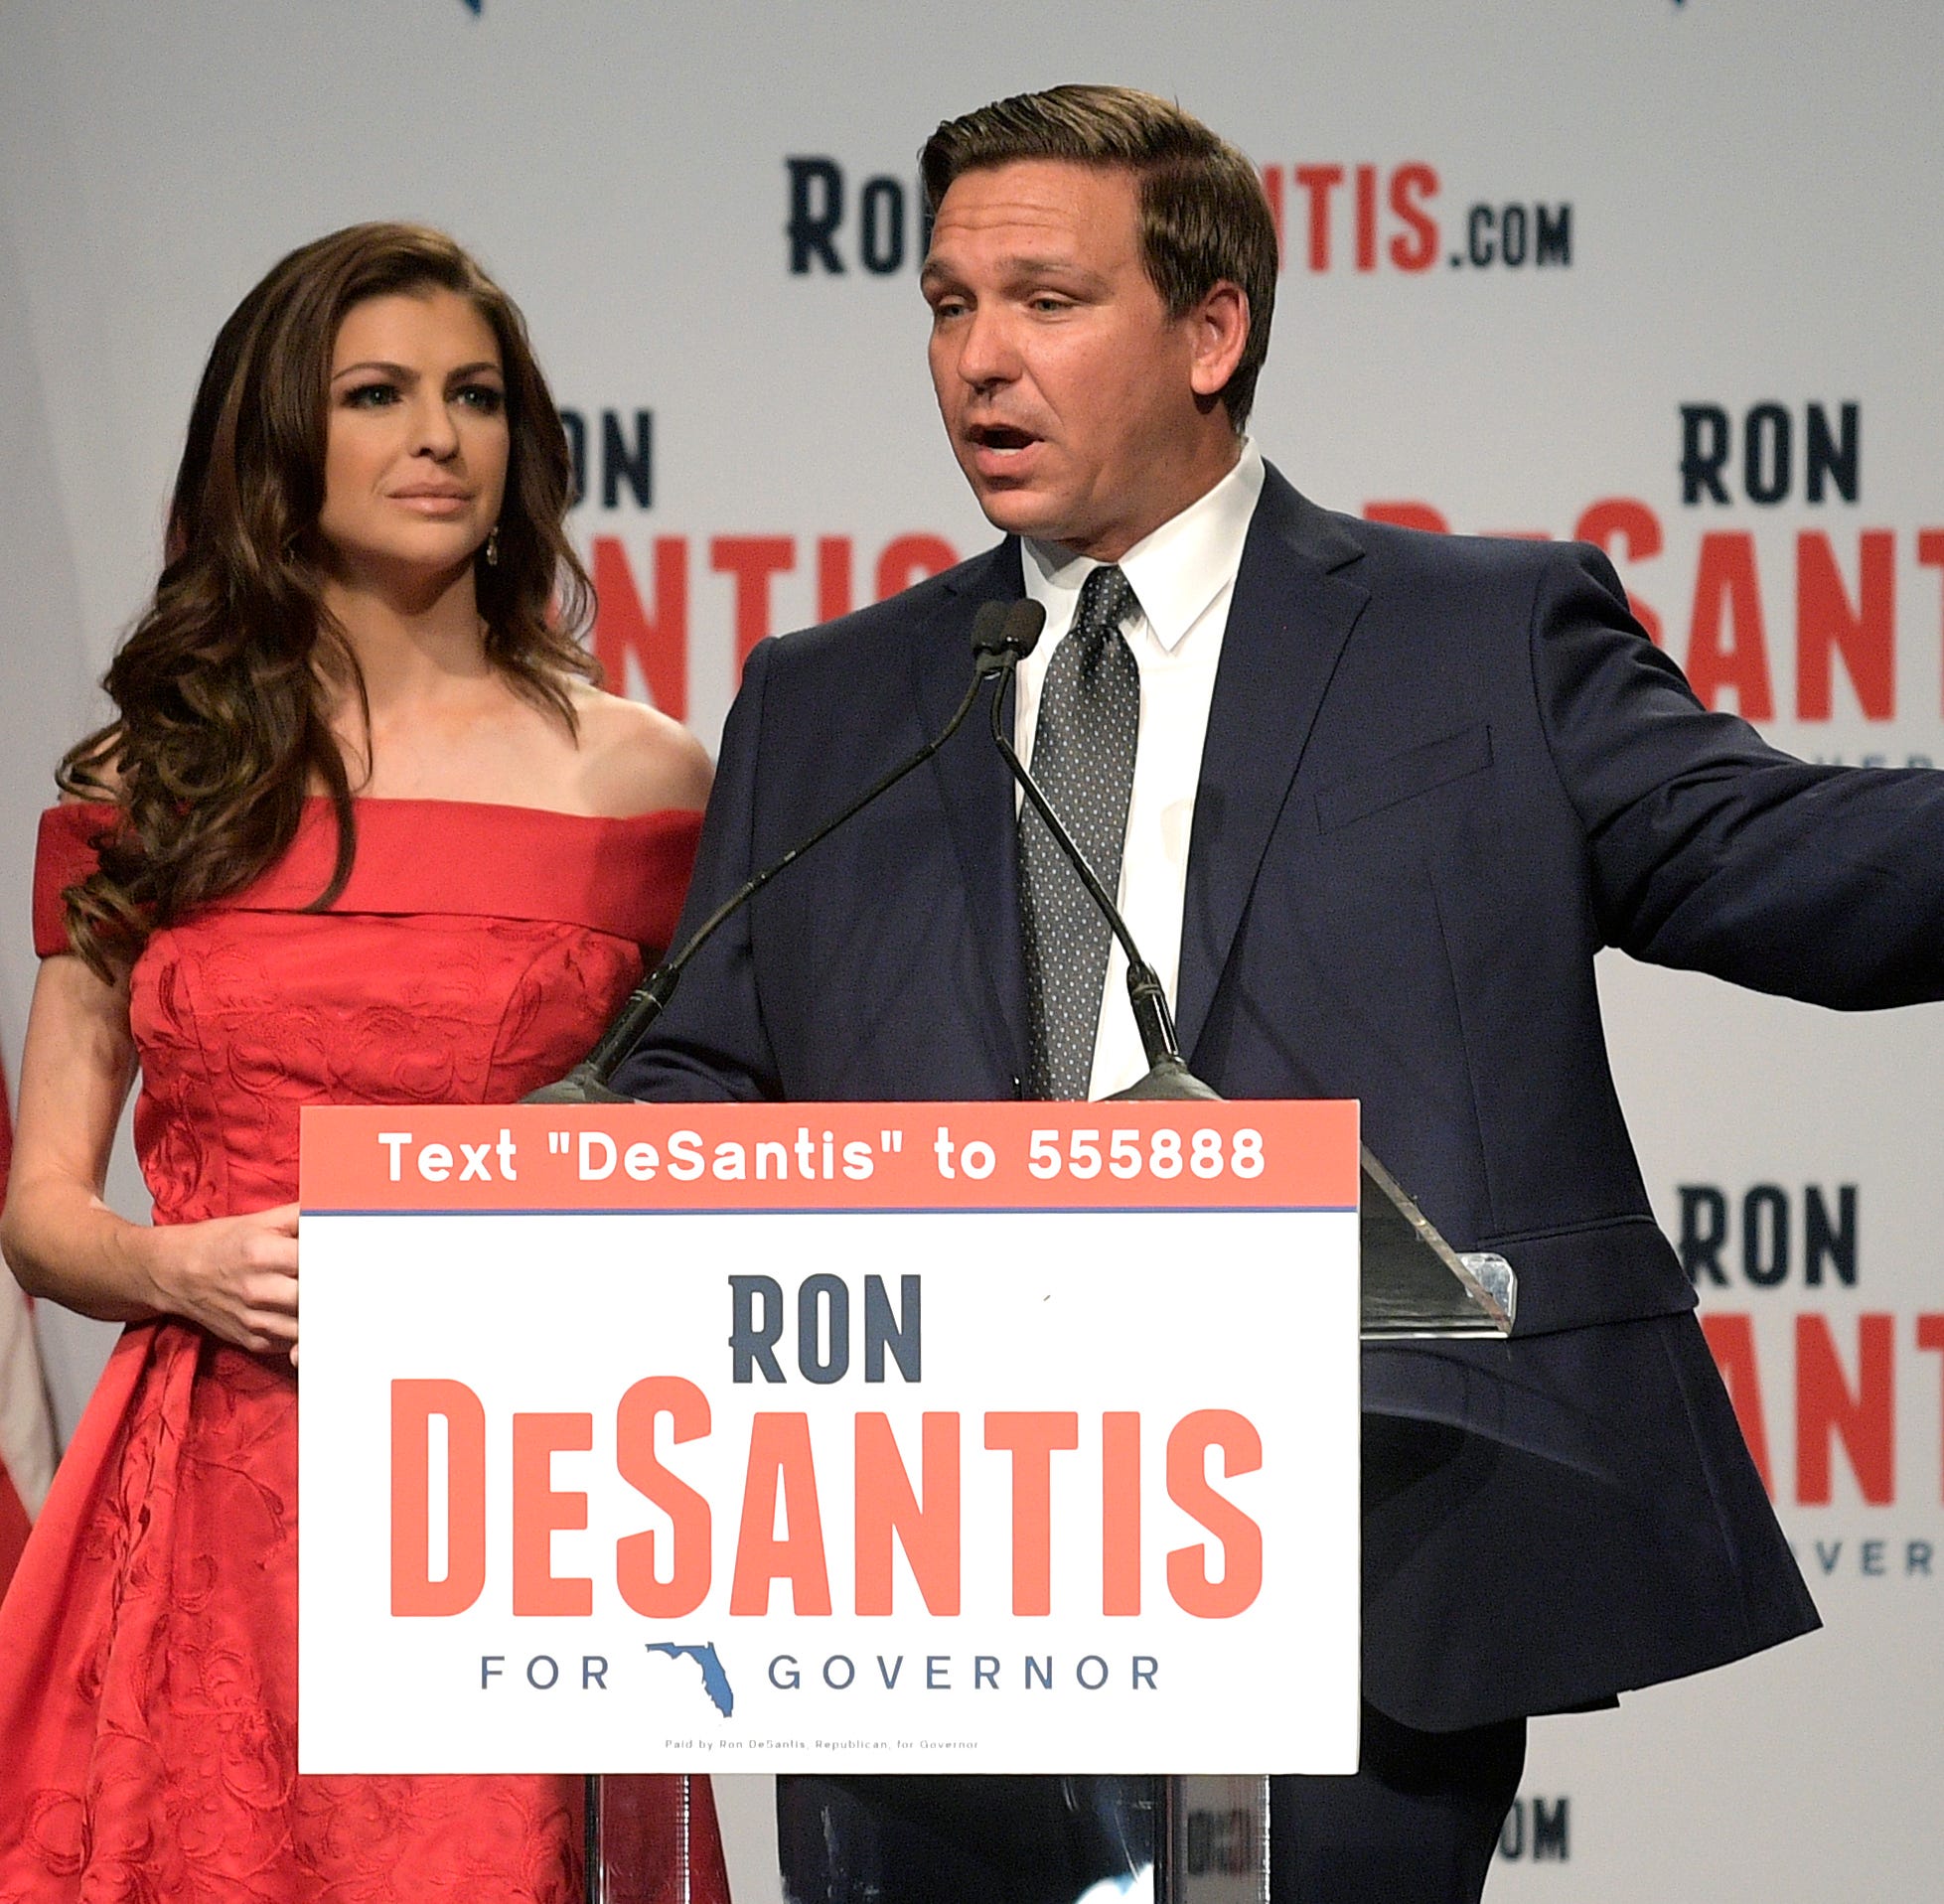 Florida Republican gubernatorial candidate Ron DeSantis, right, speaks to supporters with his wife, Casey, at an election party in Orlando after winning the Republican primary on Tuesday, Aug. 28, 2018.